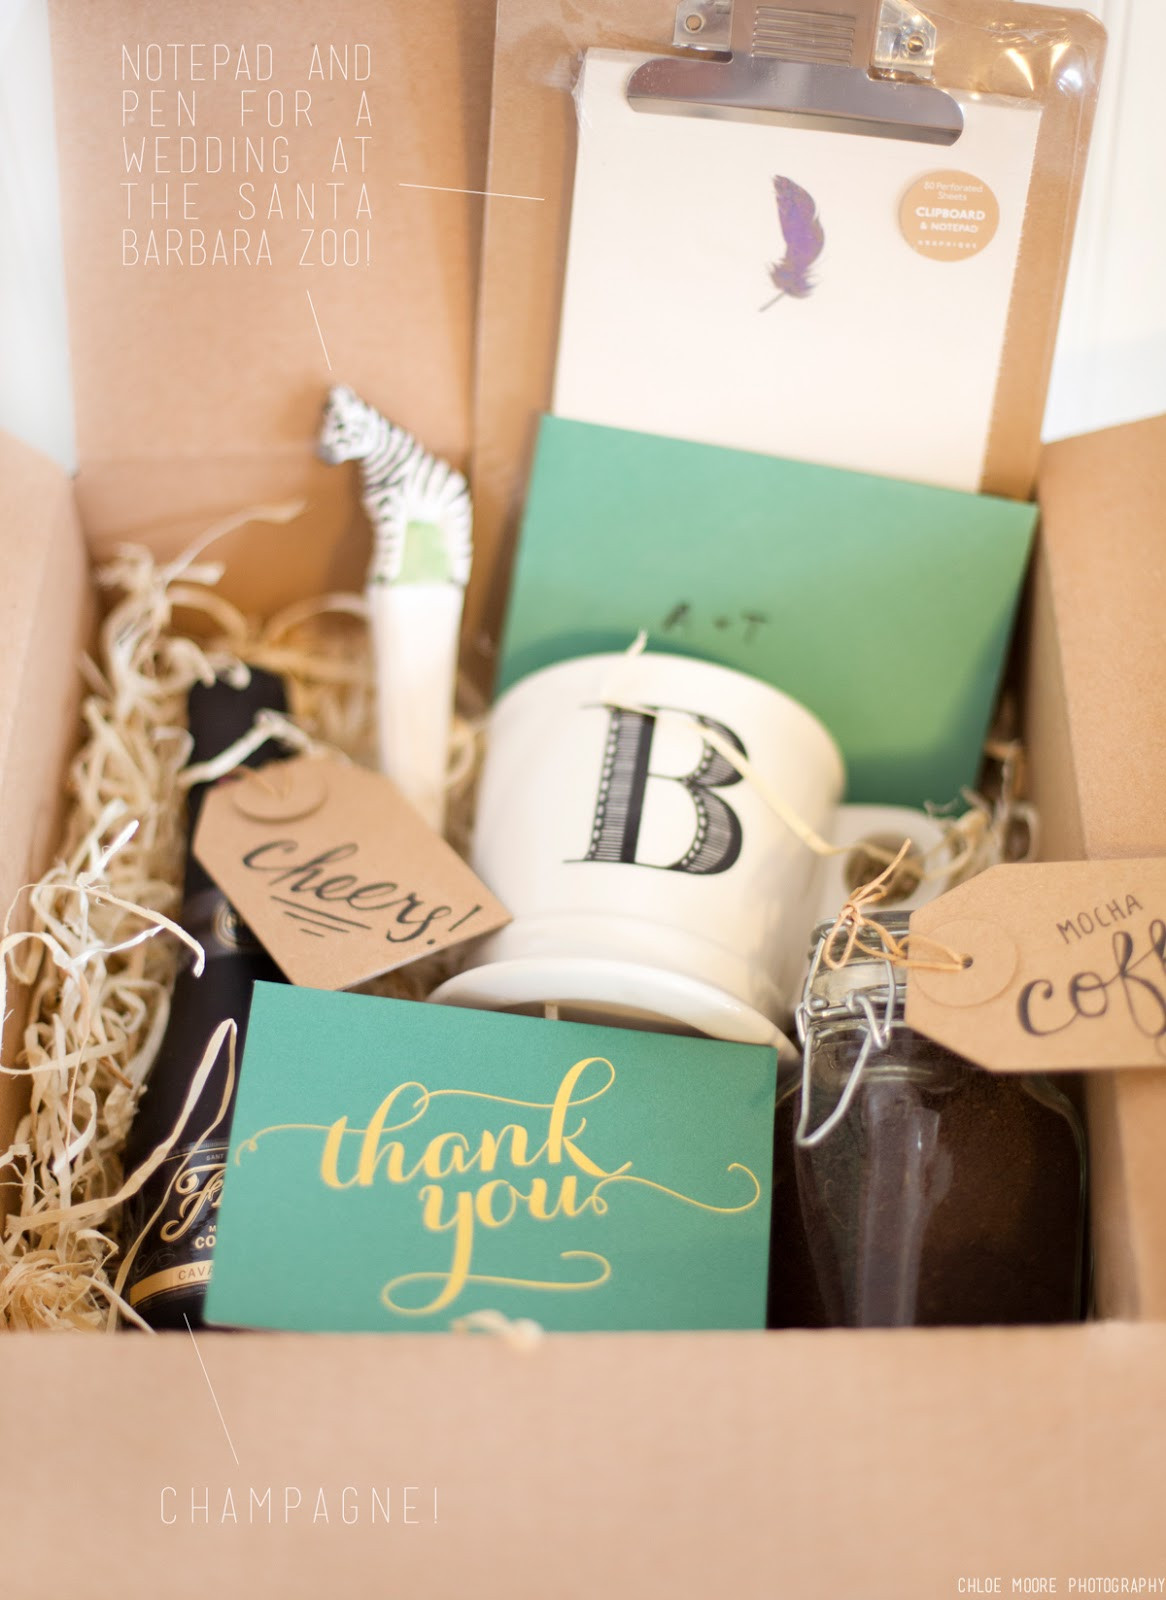 Gift Basket Ideas For Clients
 Chloe Moore graphy The Blog New Client Gift Packages